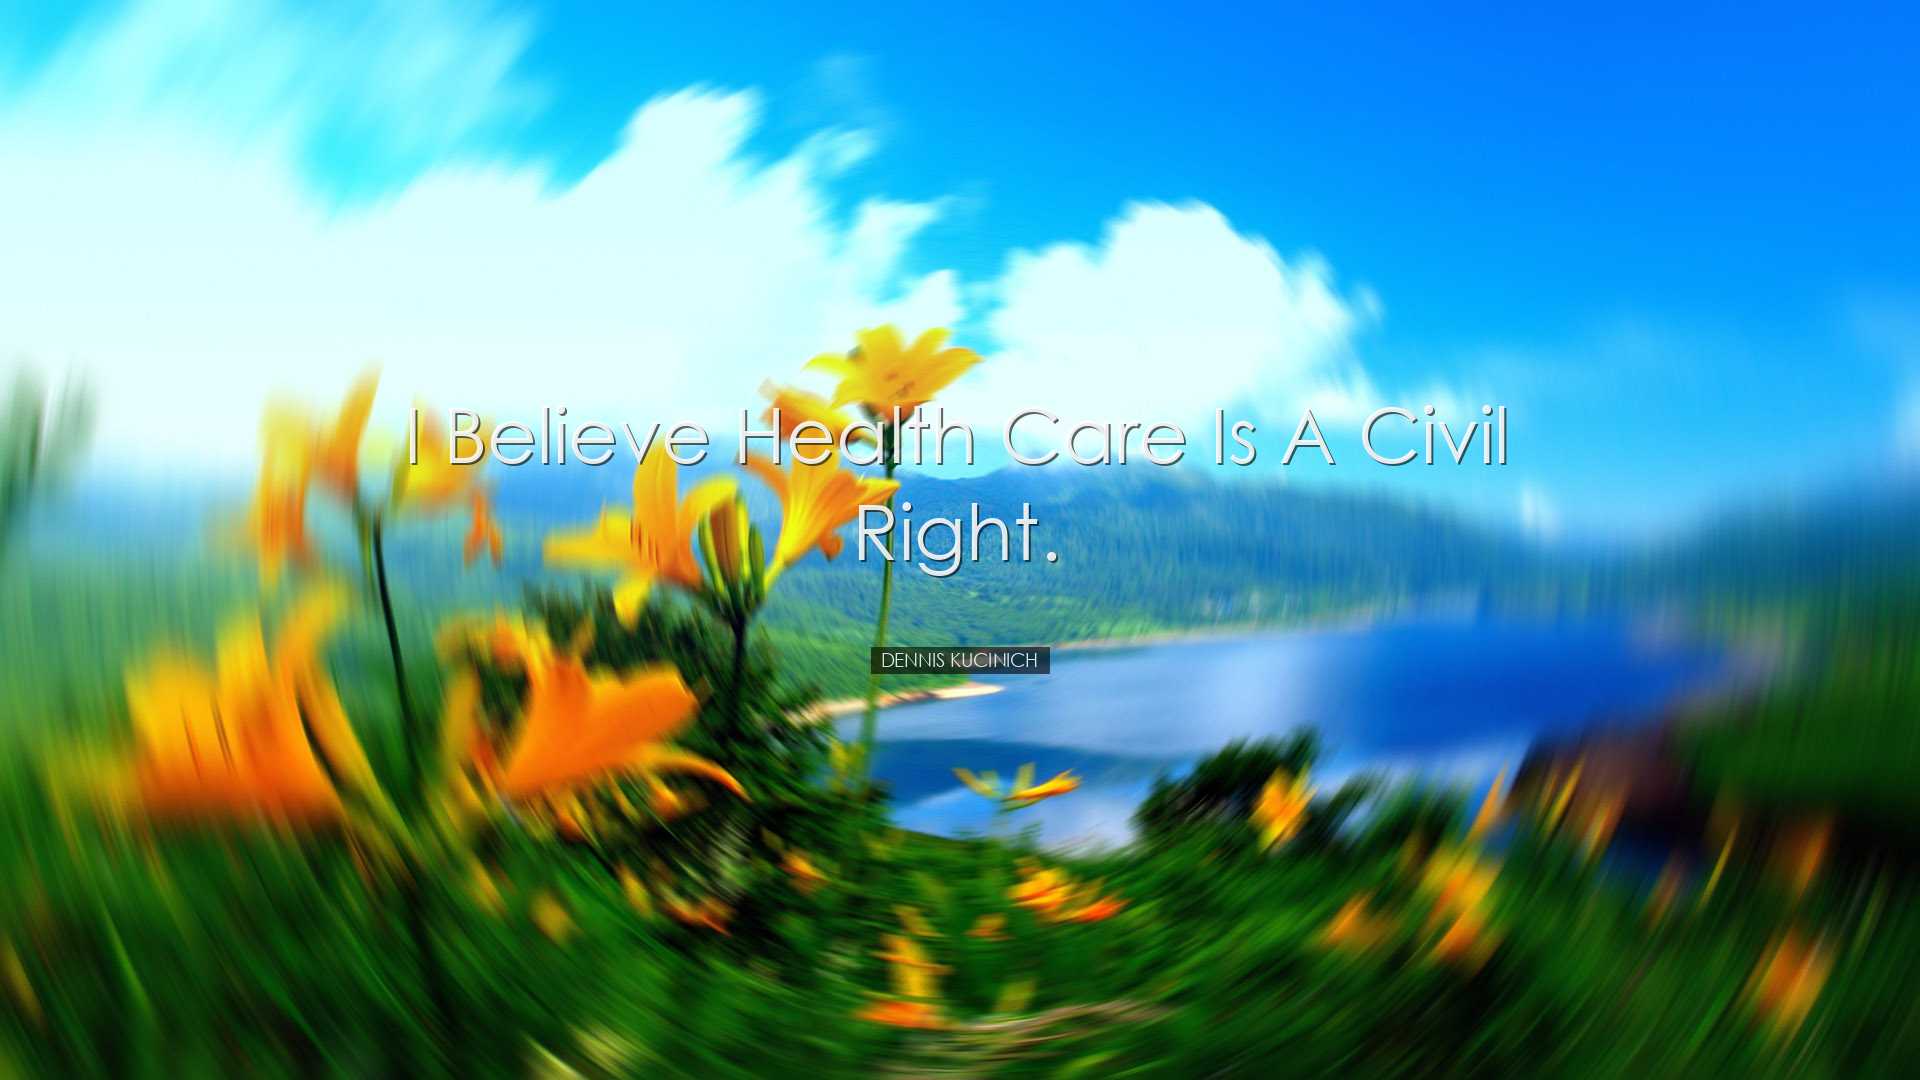 I believe health care is a civil right. - Dennis Kucinich